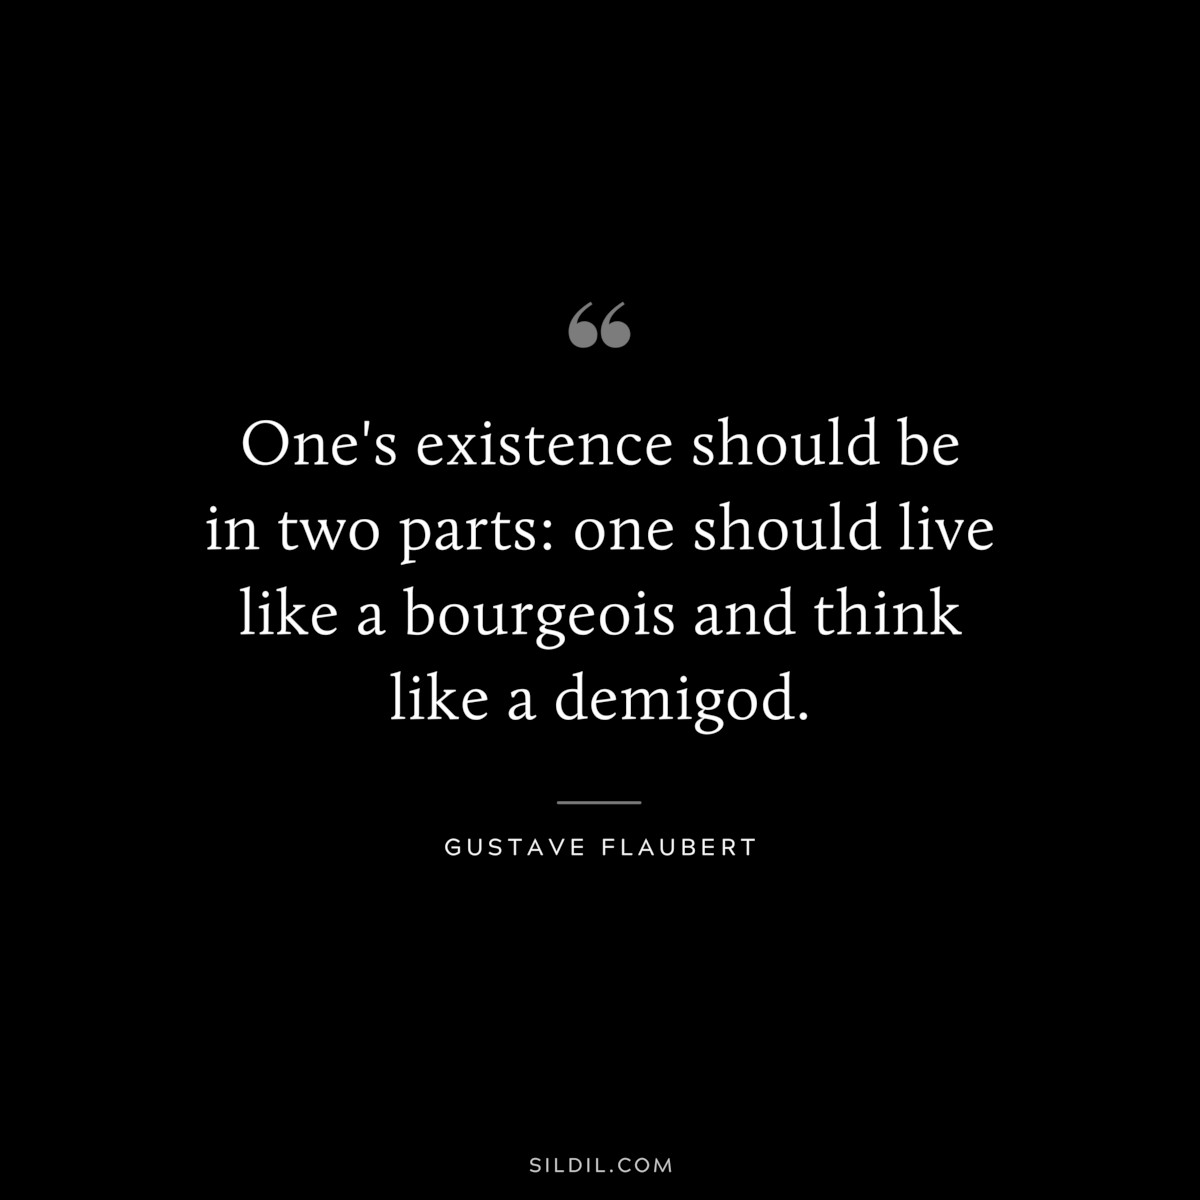 One's existence should be in two parts: one should live like a bourgeois and think like a demigod. ― Gustave Flaubert